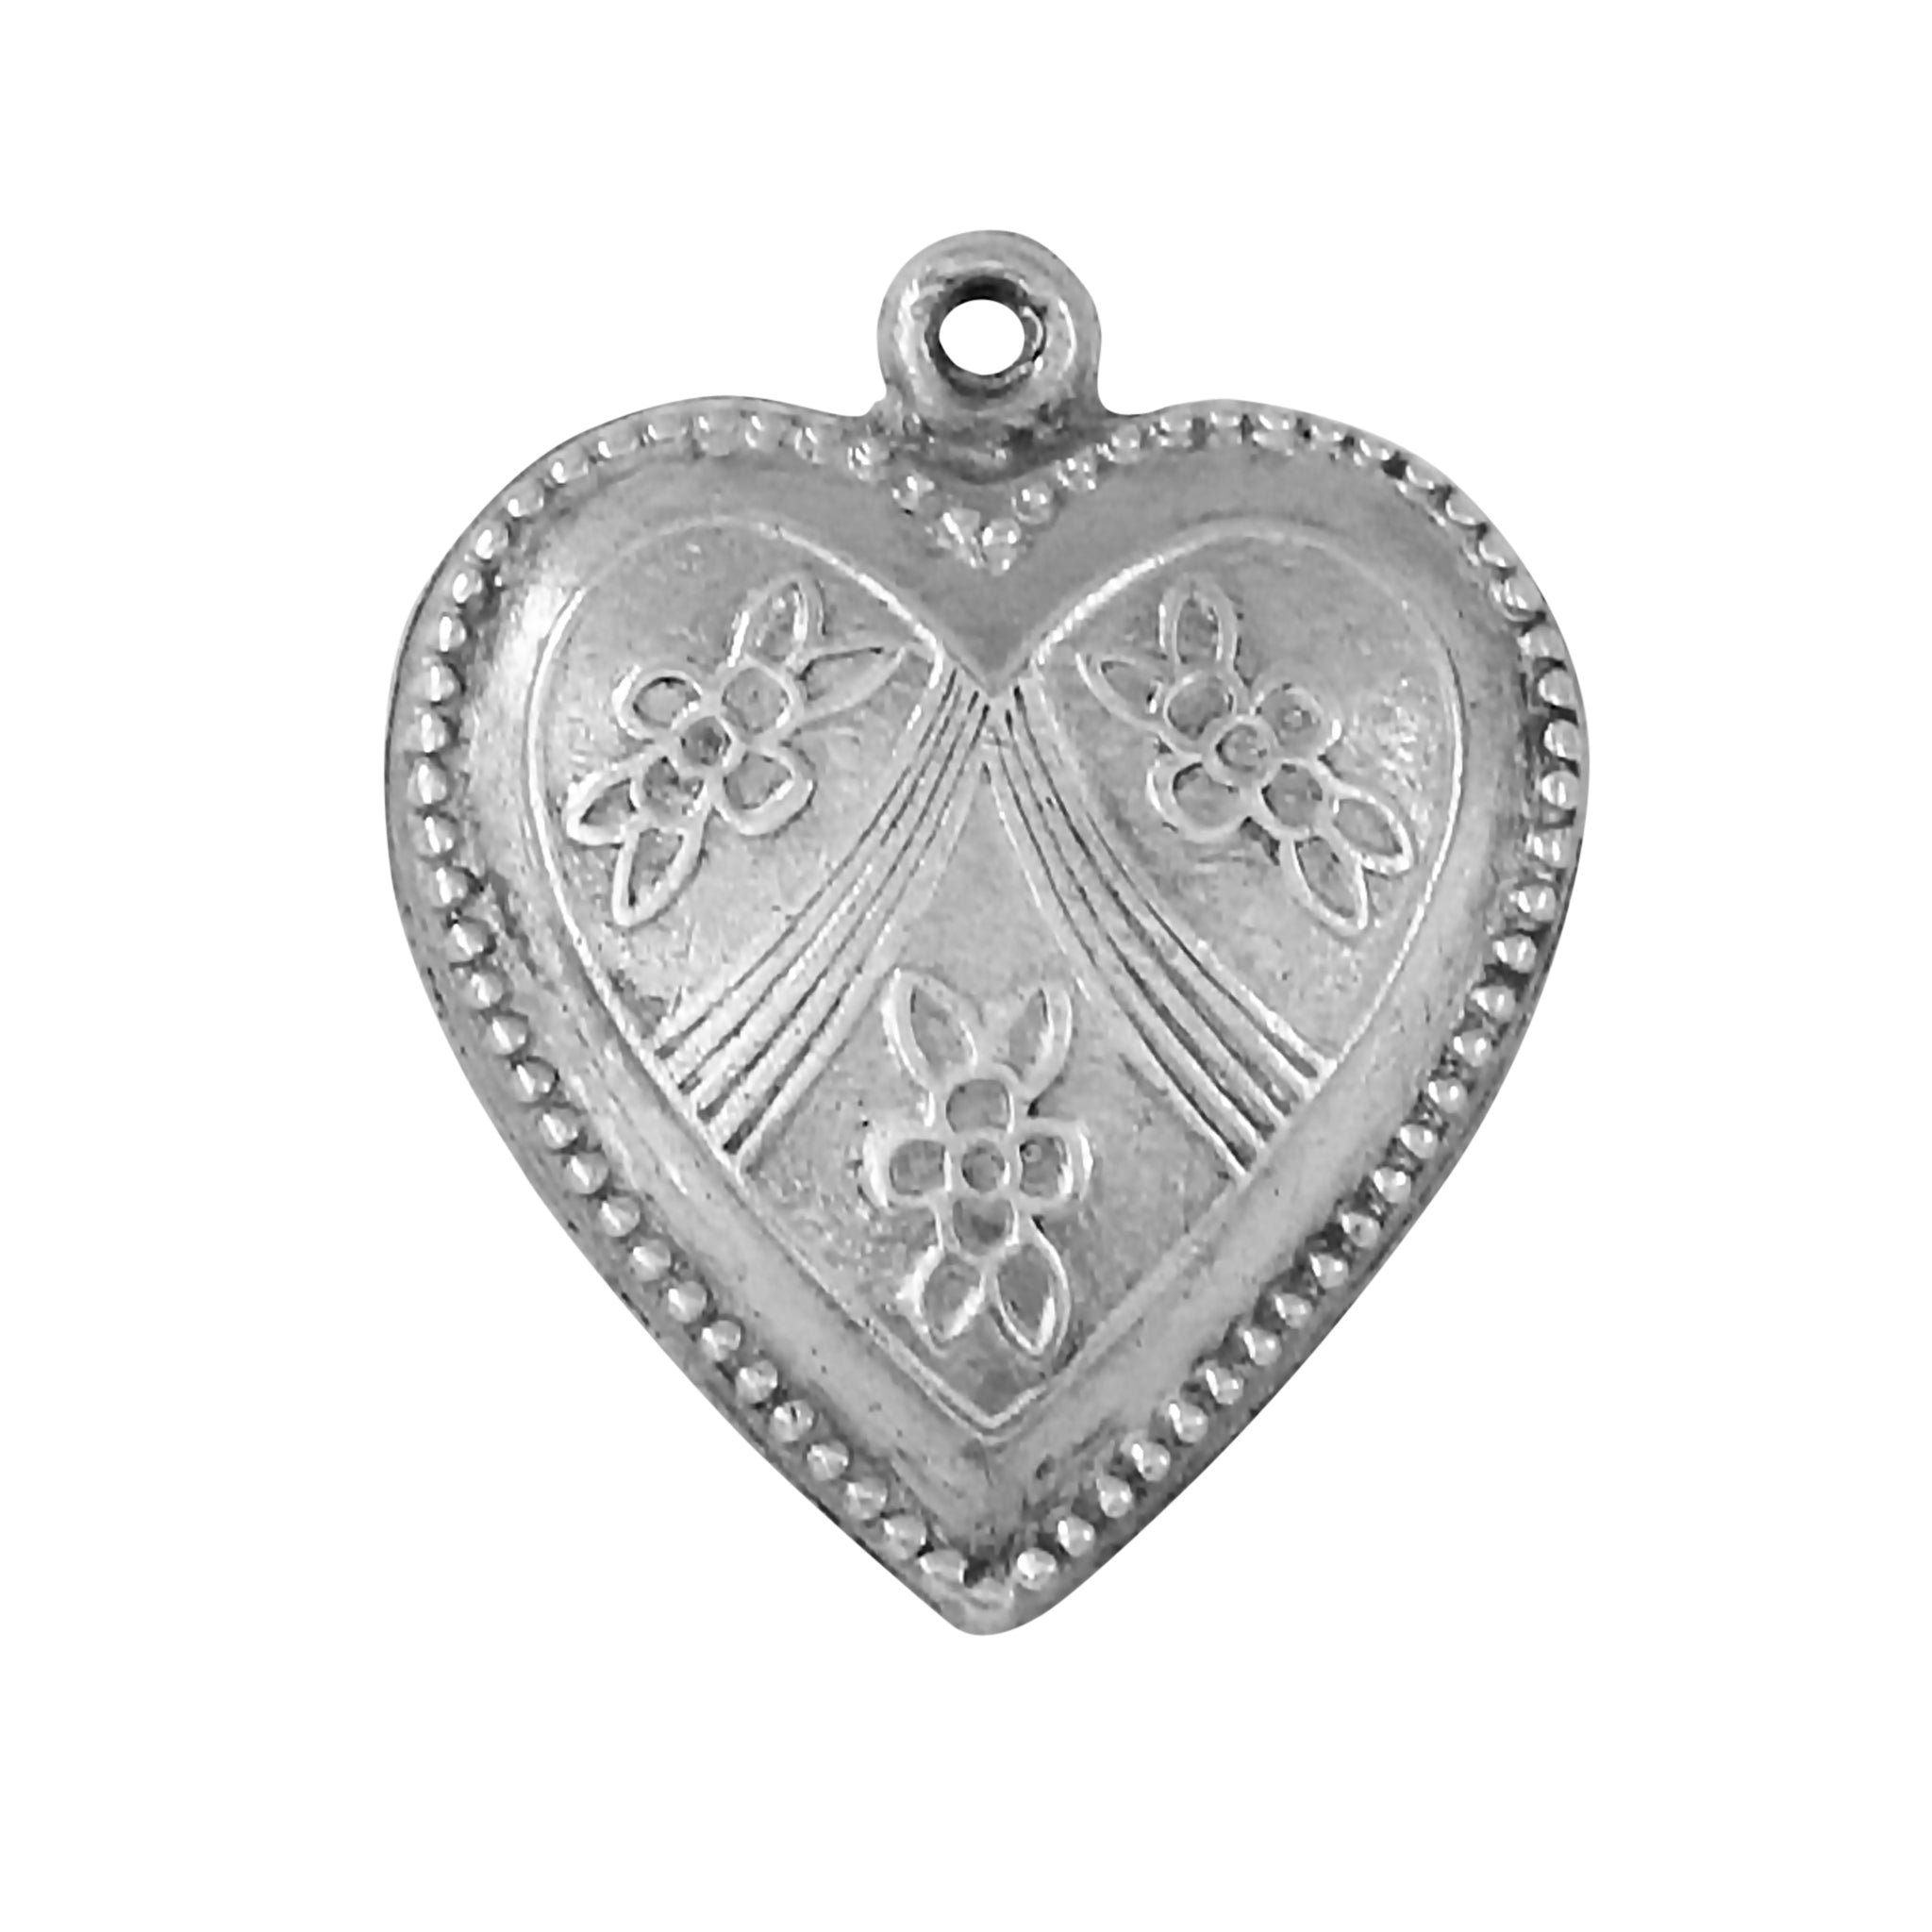 Vintage Forget Me Not Flower Sterling Silver Puffy Heart Charm